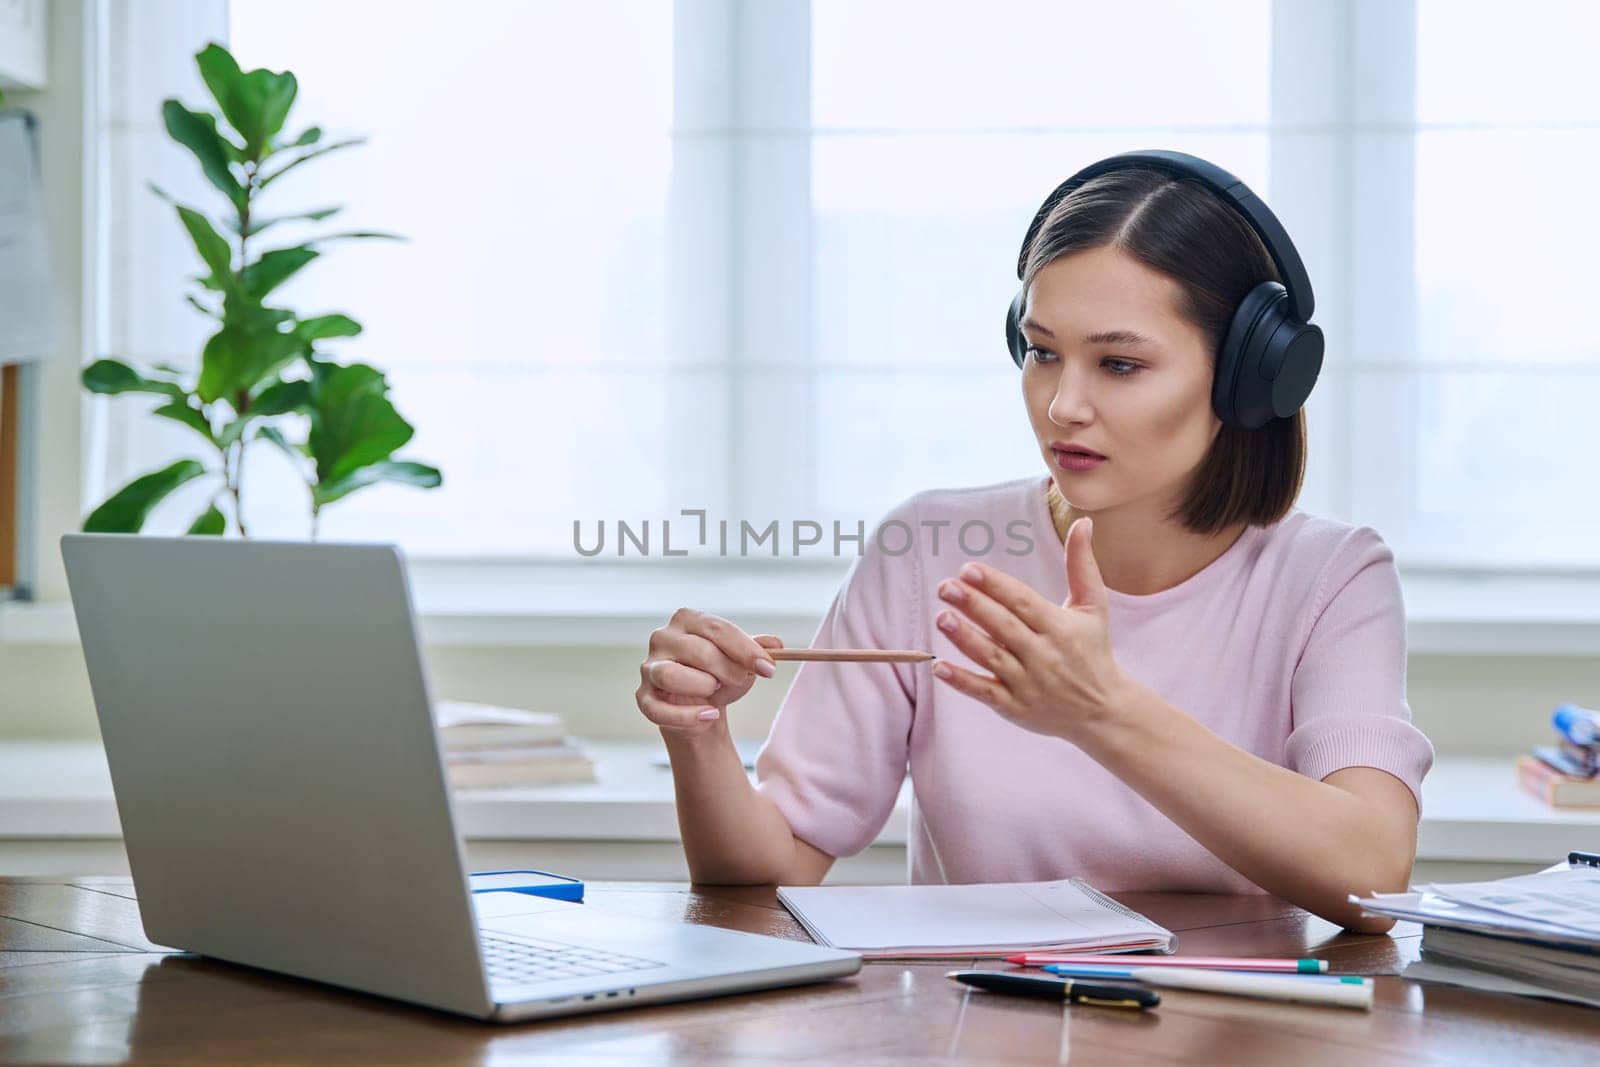 Young female college university student in headphones talking studying using laptop computer for video chat conference call sitting at home. Internet online remote lessons webinars education training